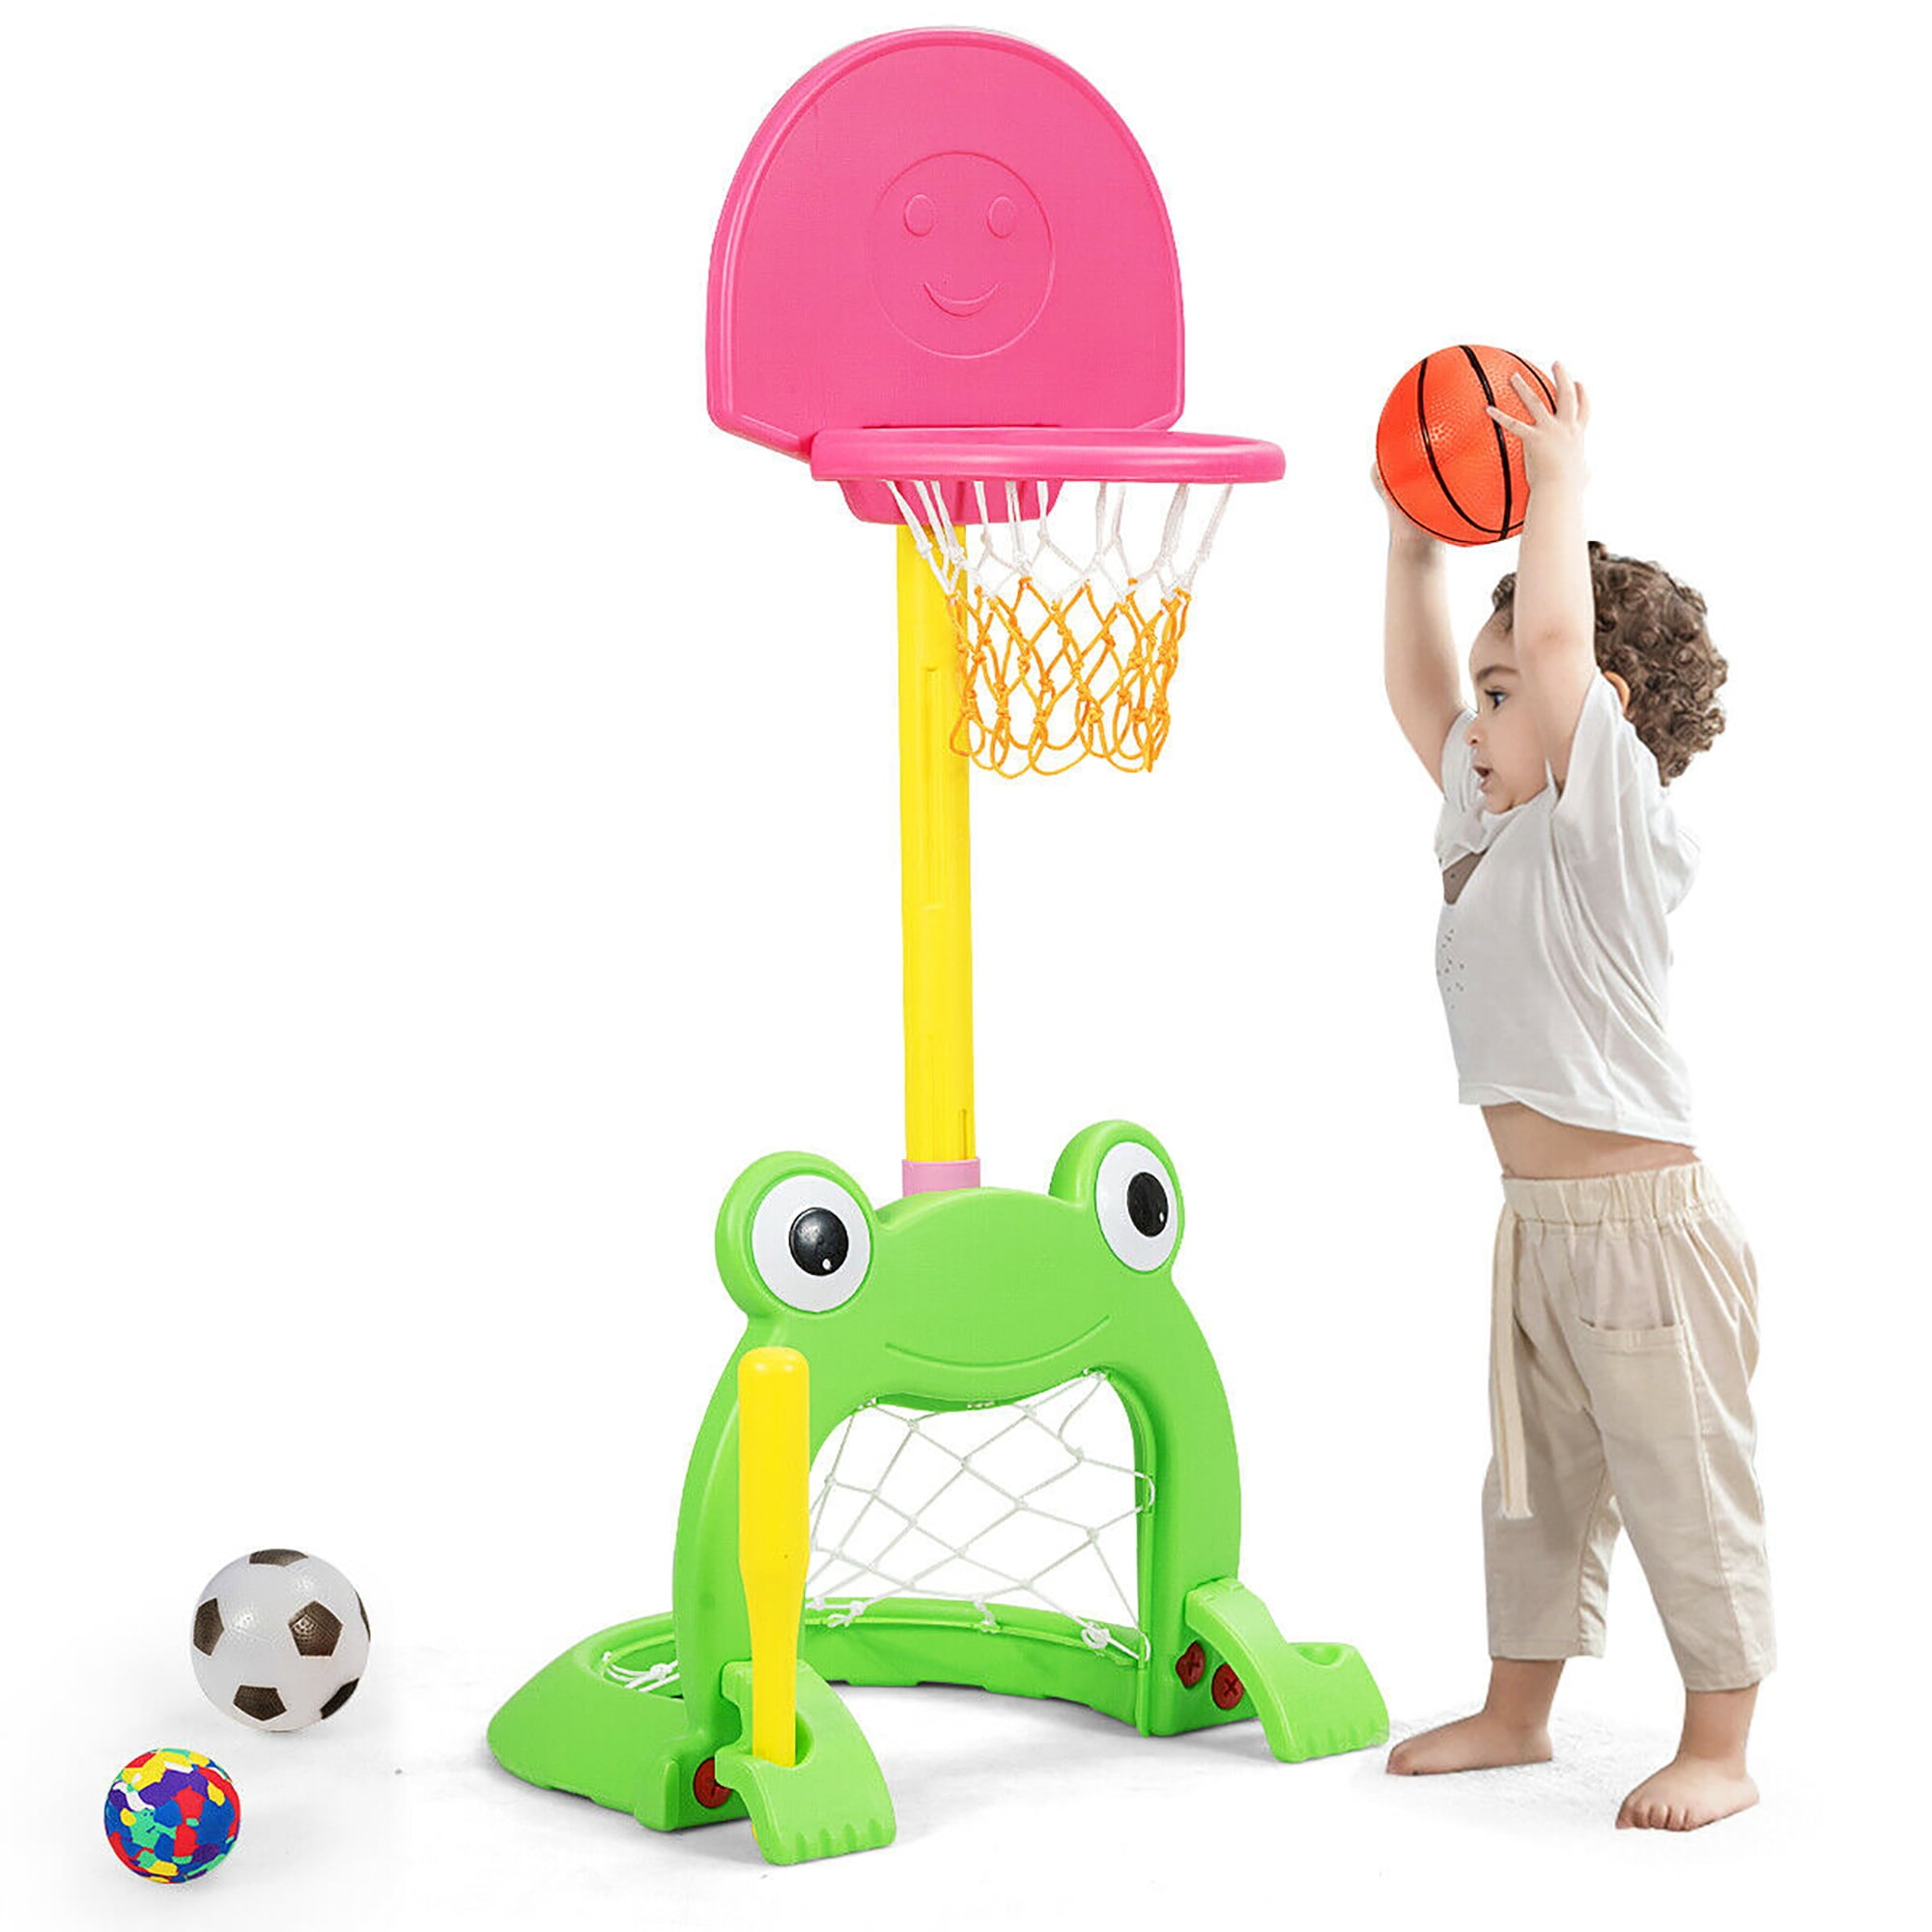 Ring Toss Play Set Basketball Hoop Soccer Goal Indoor Outdoor Kids Toy Games for Baby Toddlers Fowecelt 3-in-1 Kids Sports Center